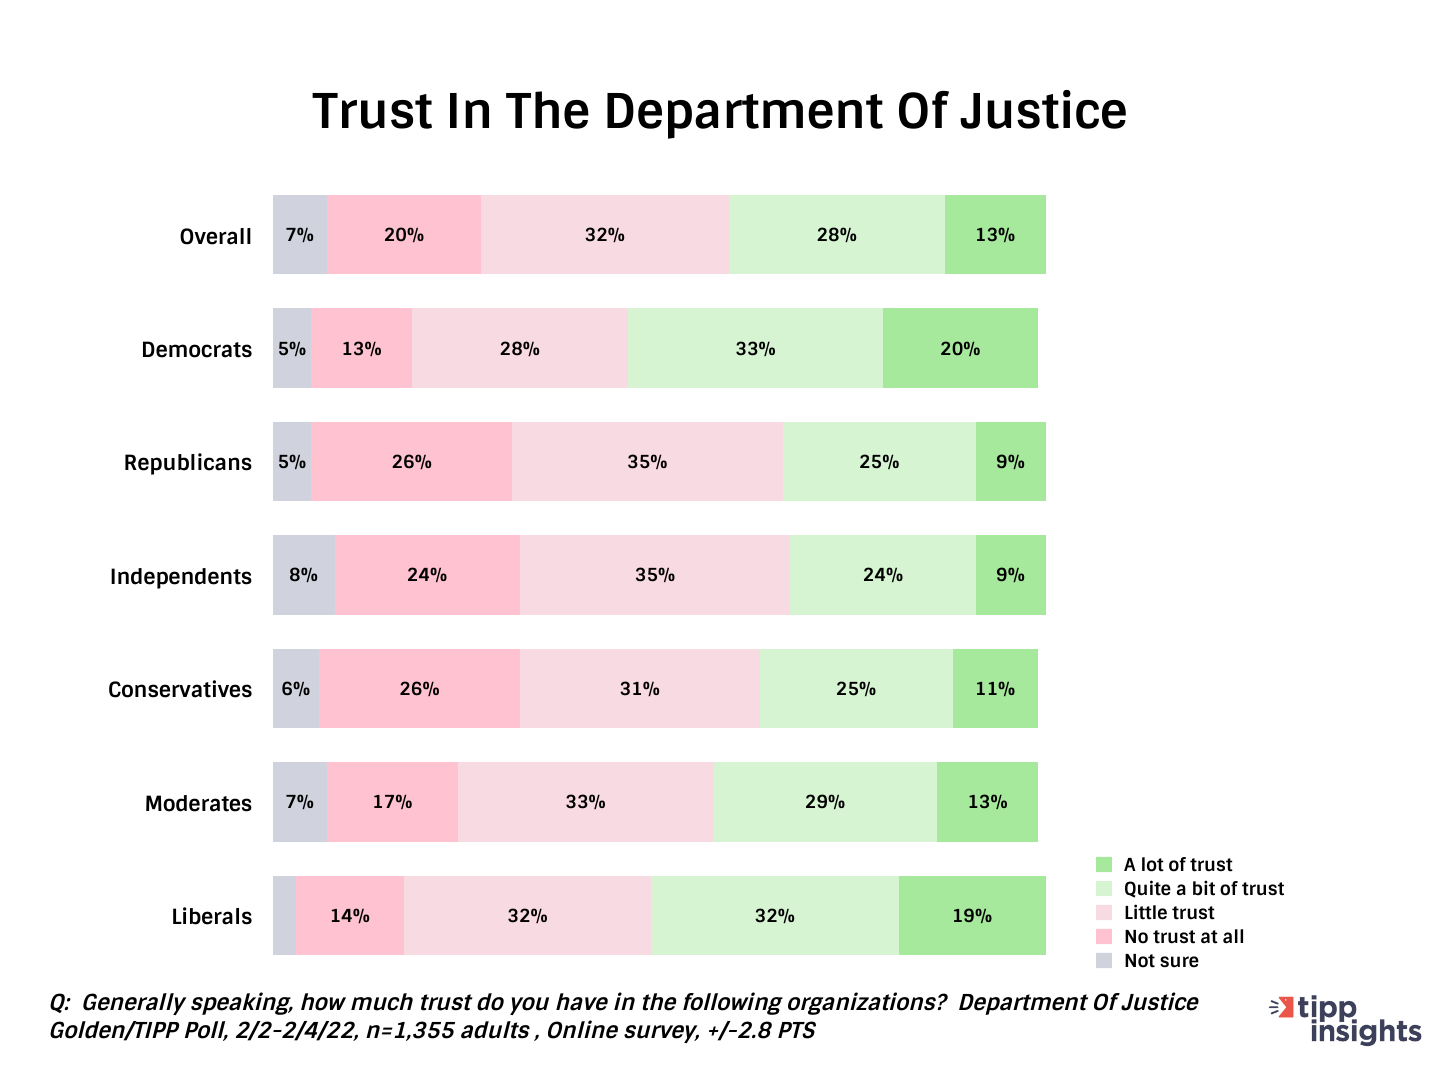 Golden/TIPP Poll results: How much trust do Americans have in the Department of Justice